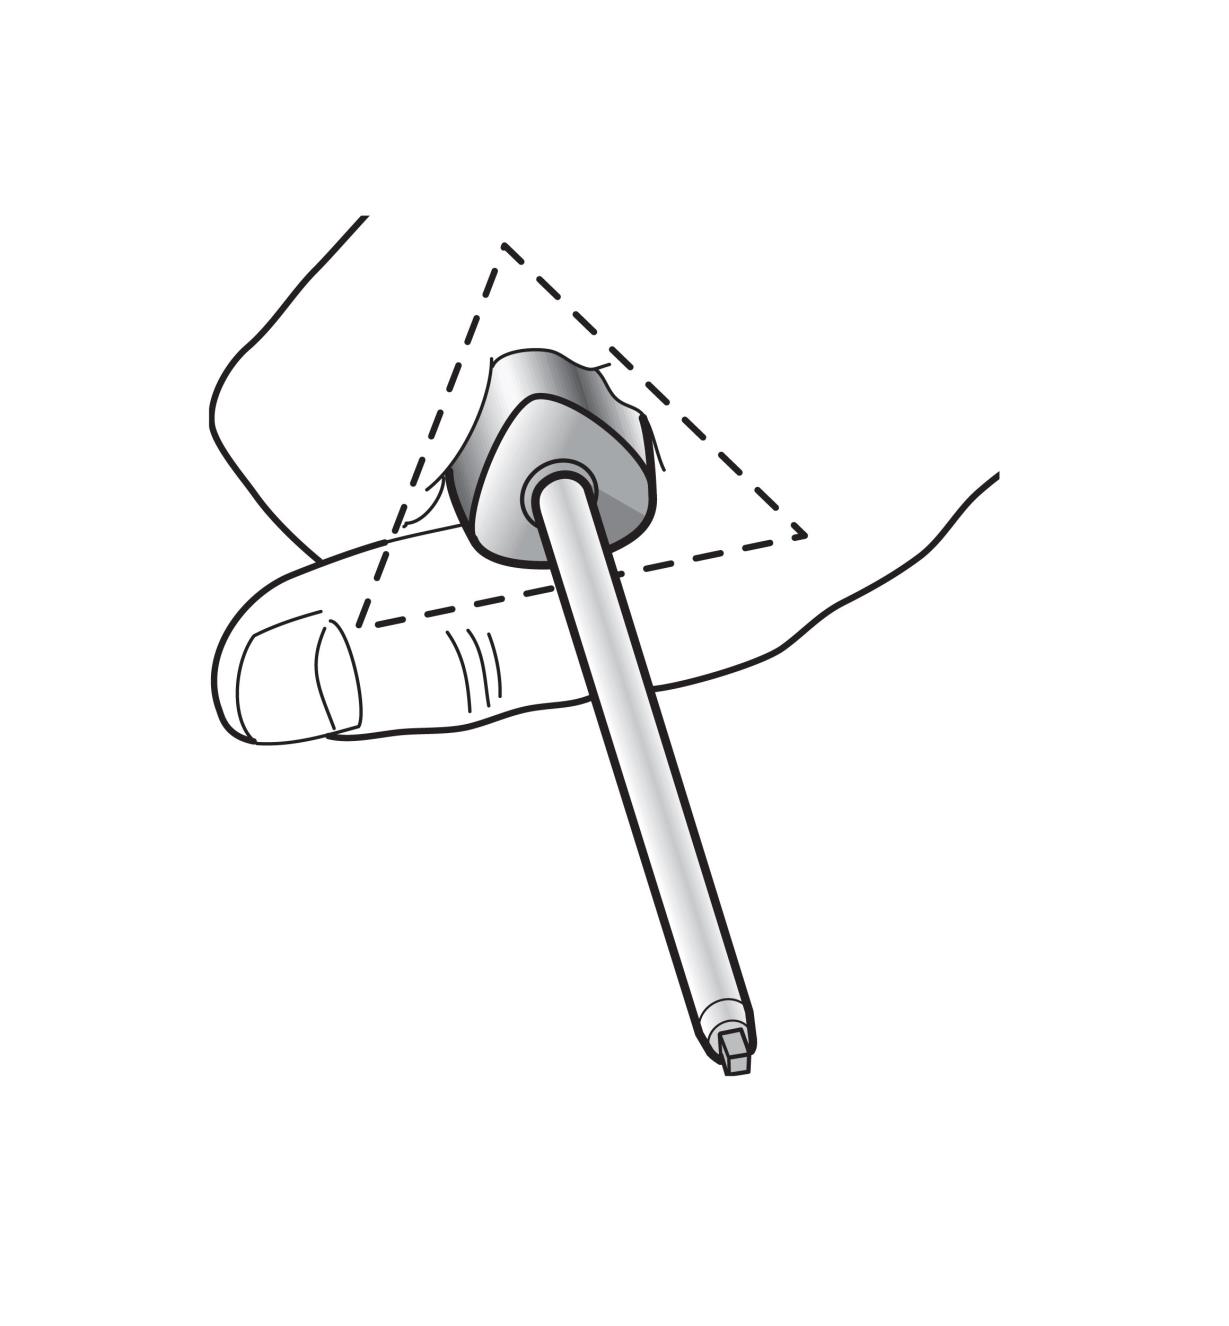 Illustration shows how the screwdriver handle fits in a closed hand